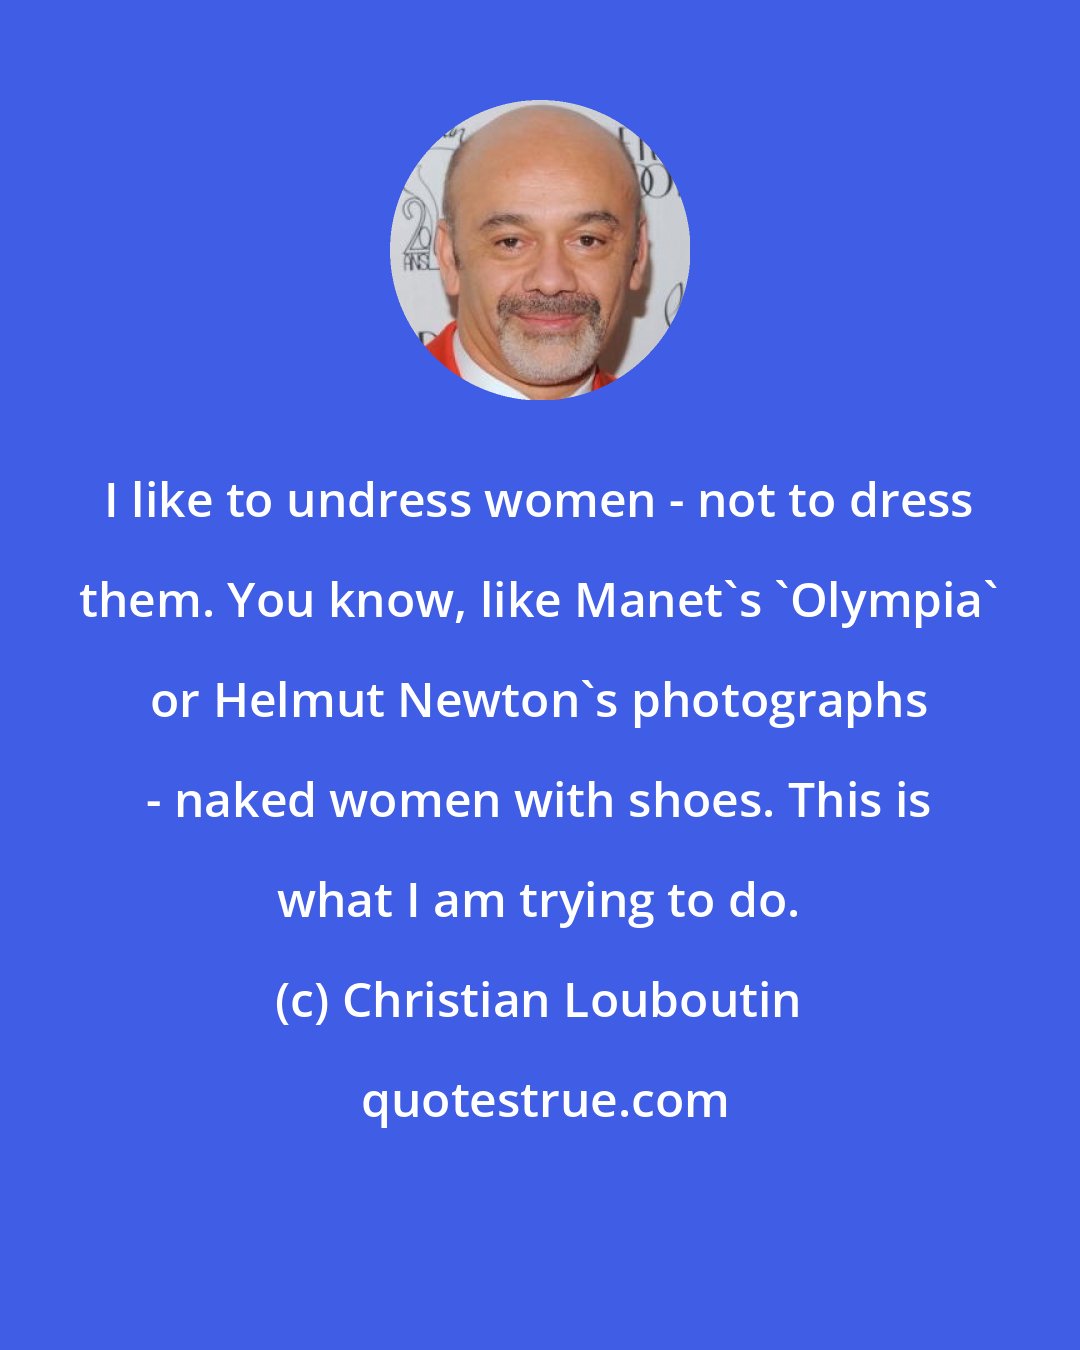 Christian Louboutin: I like to undress women - not to dress them. You know, like Manet's 'Olympia' or Helmut Newton's photographs - naked women with shoes. This is what I am trying to do.